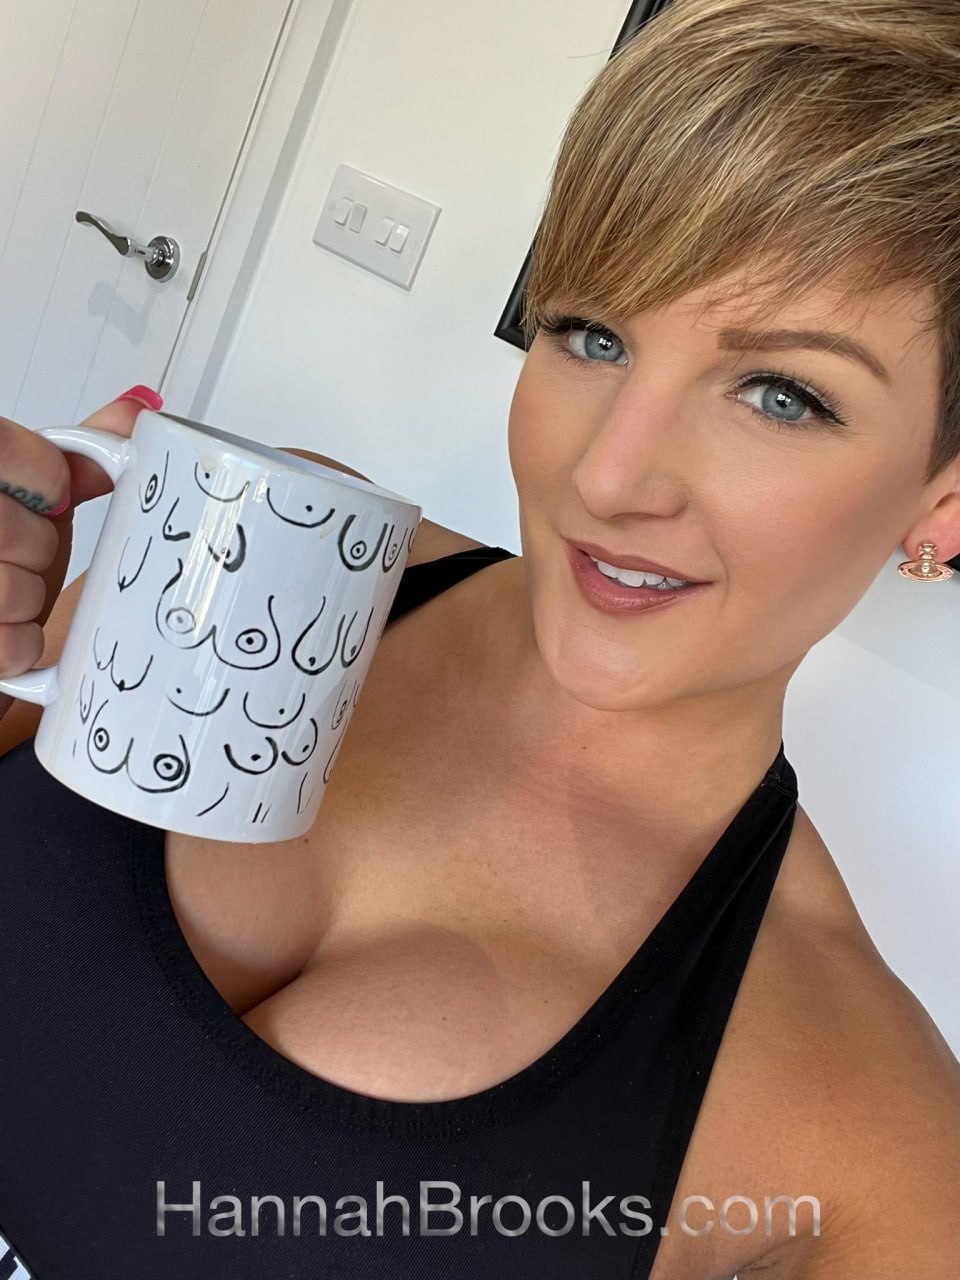 Hannah Brooks on X: The perfect mug for a titty Tuesday 😅 I hope everyone  is well and having a fantastic day, what has made you smile recently? 😘 x   /